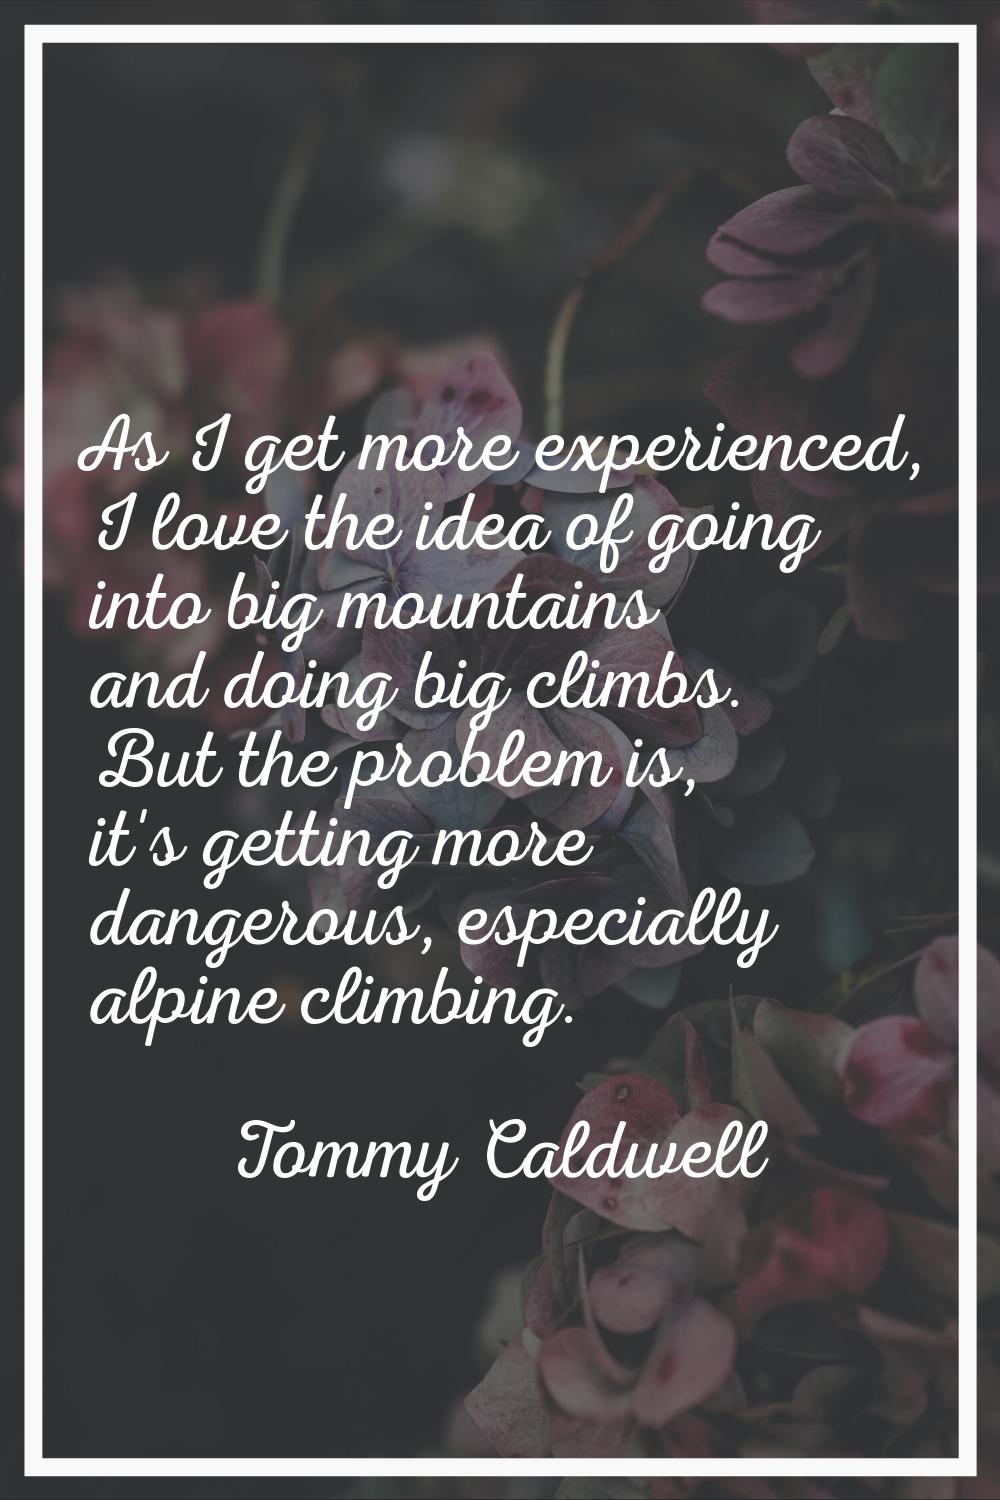 As I get more experienced, I love the idea of going into big mountains and doing big climbs. But th